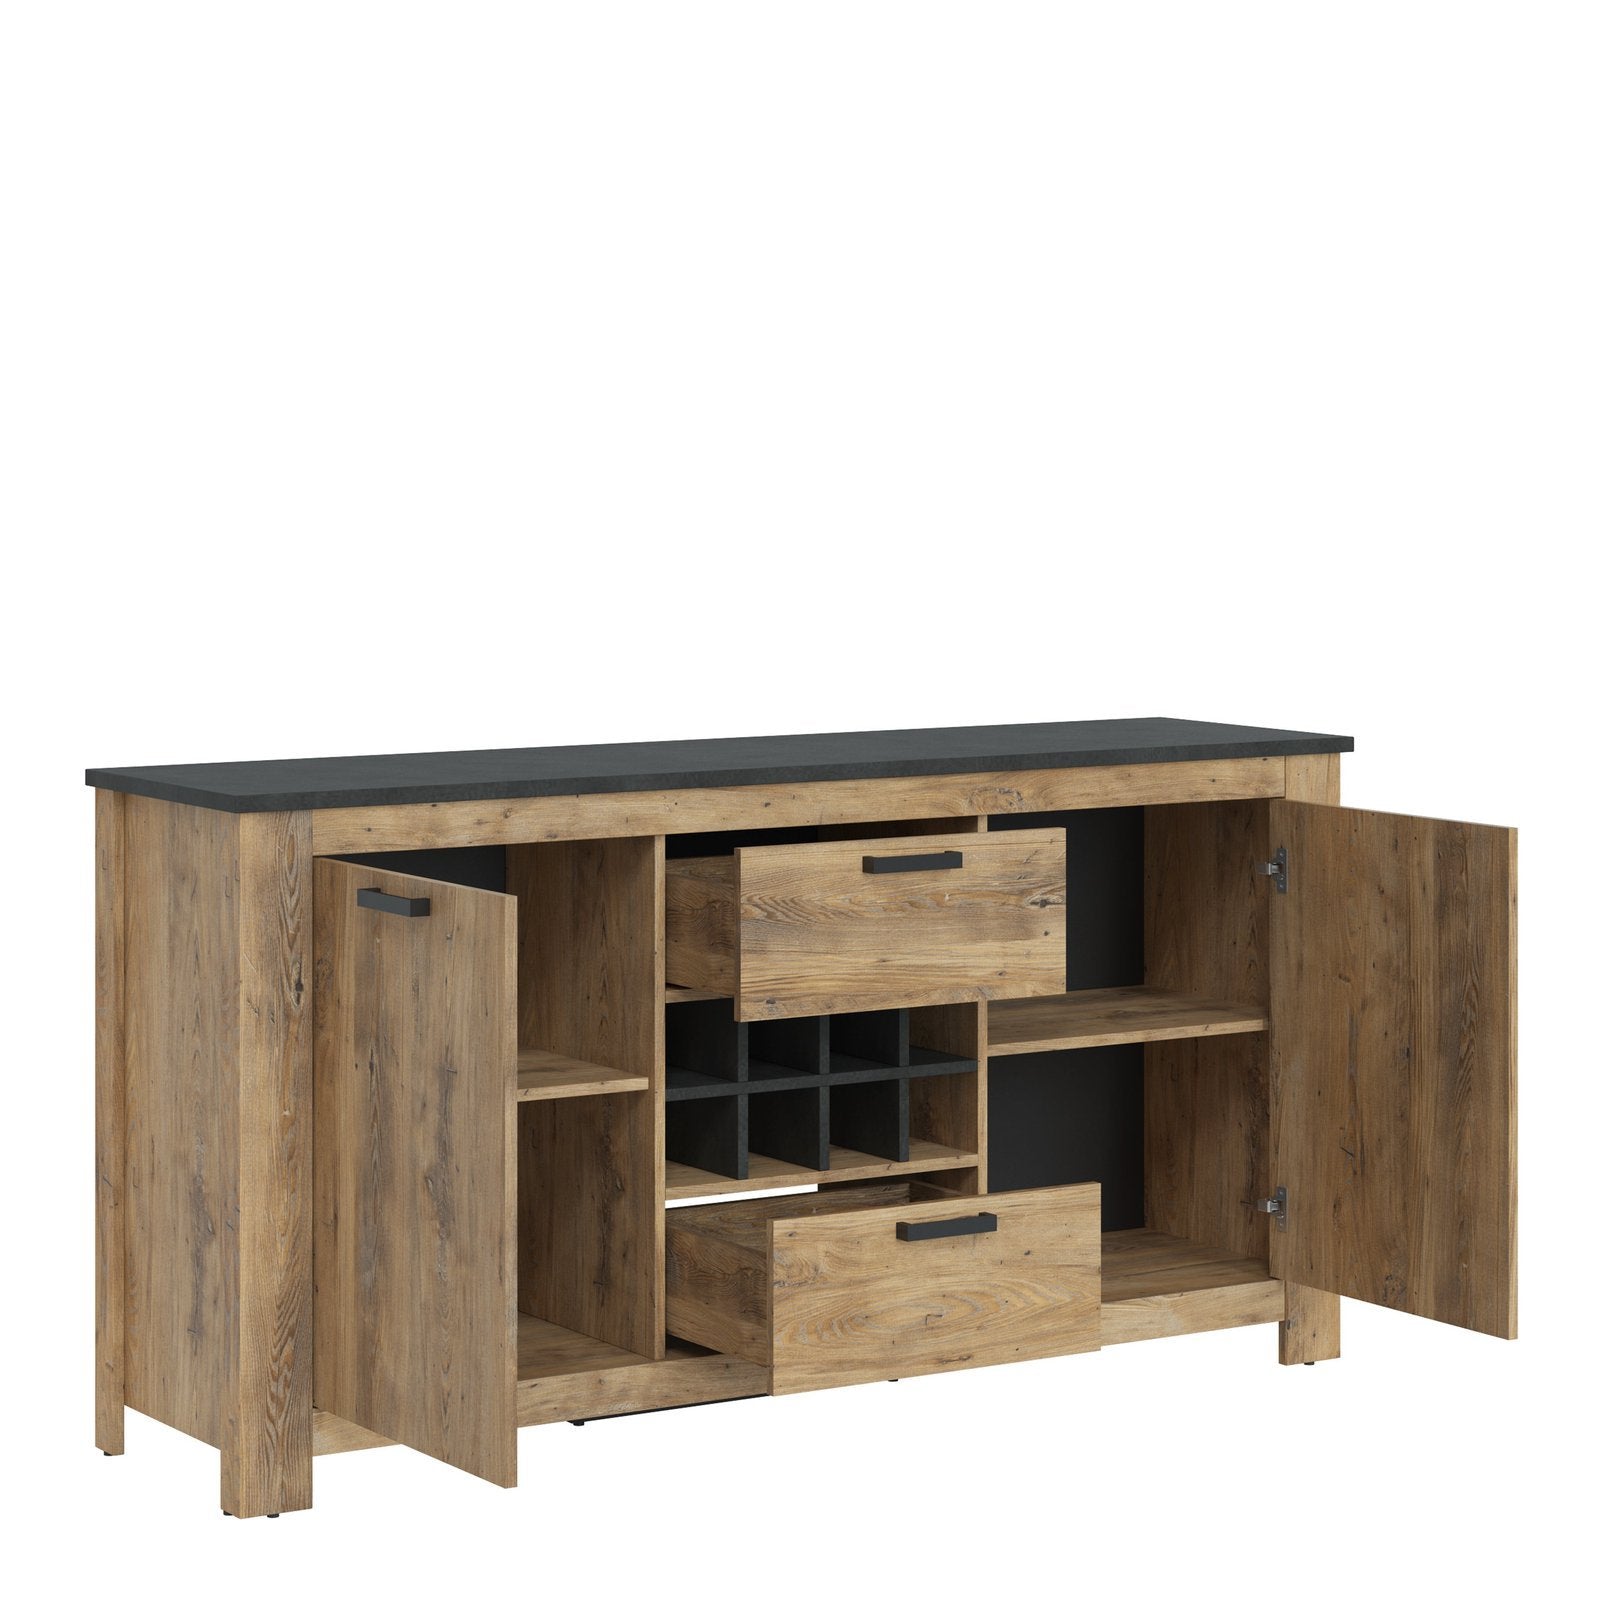 Rapallo 2 Door 2 Drawer Sideboard with Wine Rack in Chestnut and Matera Grey